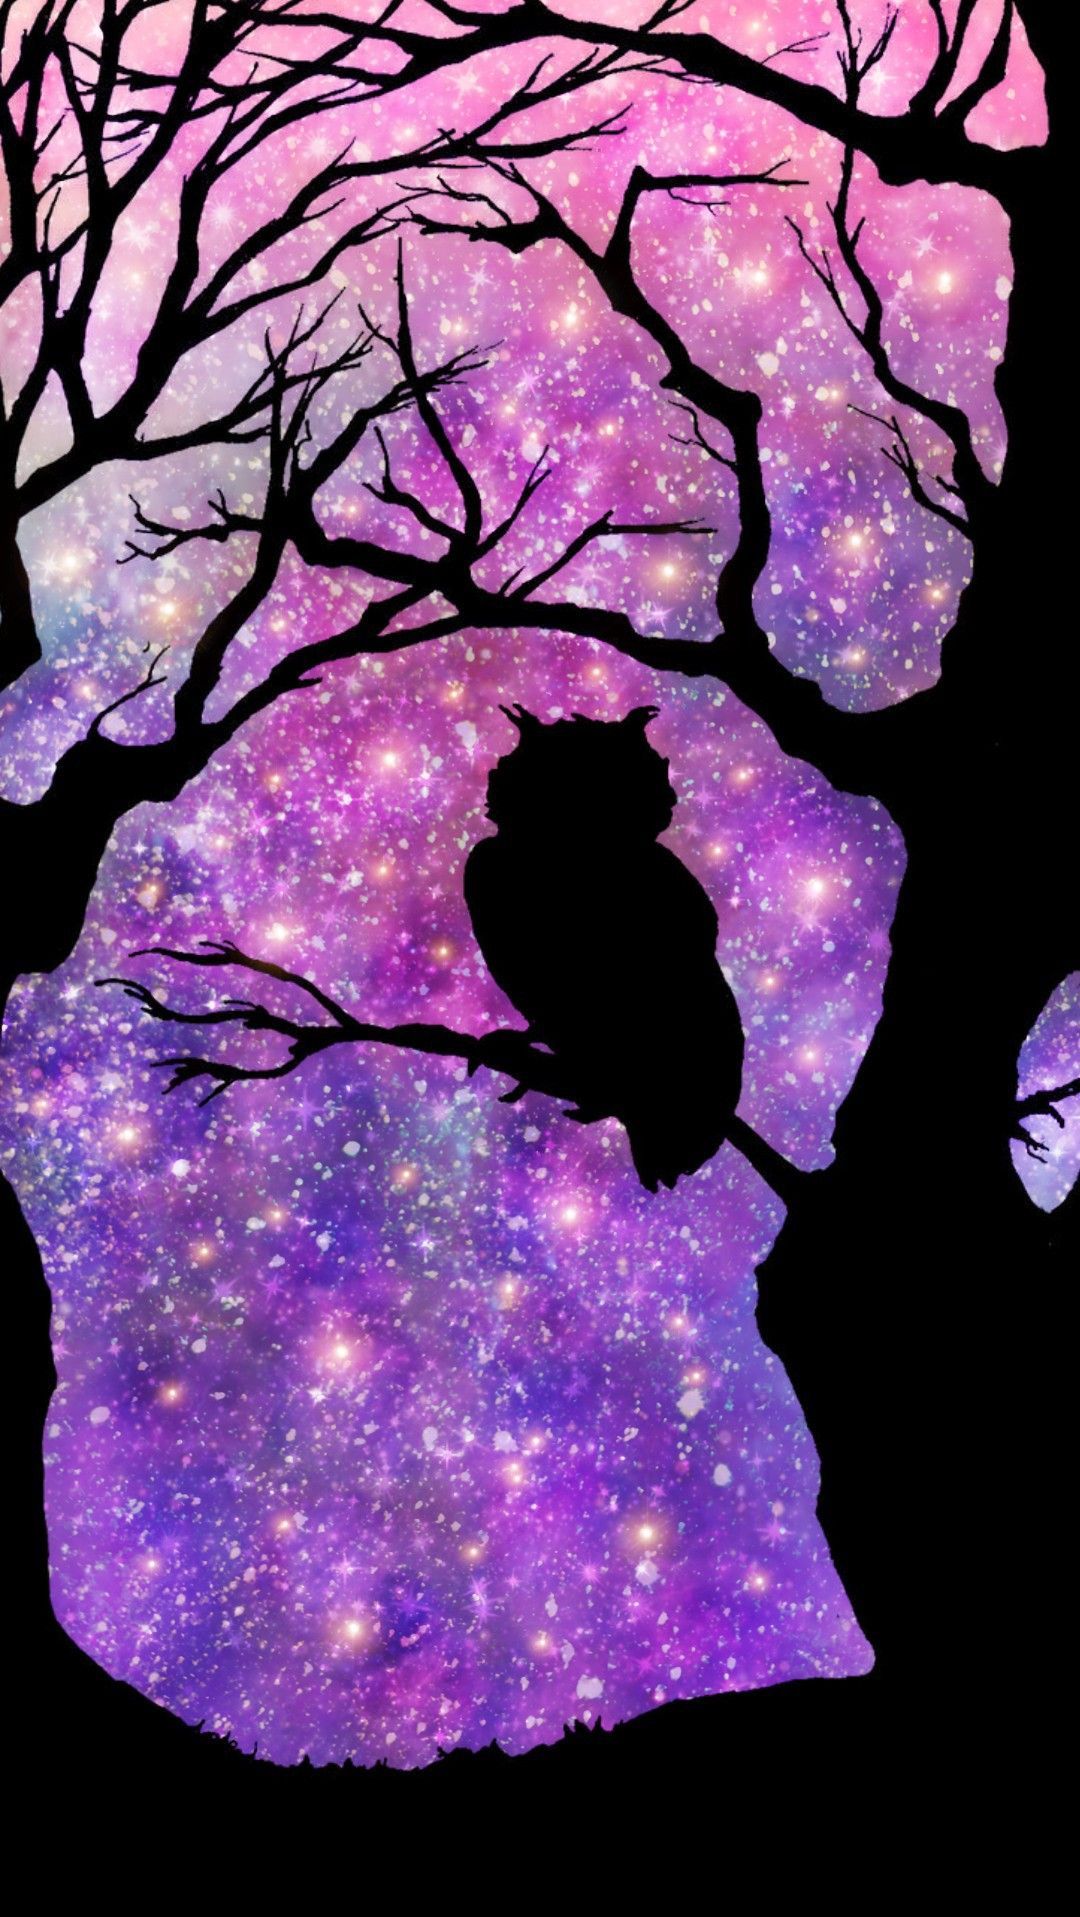 Galaxy Night Sky Owl, made by me #purple #sparkly #wallpaper #background #sparkles #glittery #art #night #s. Owl wallpaper, Owl background, Owl wallpaper iphone